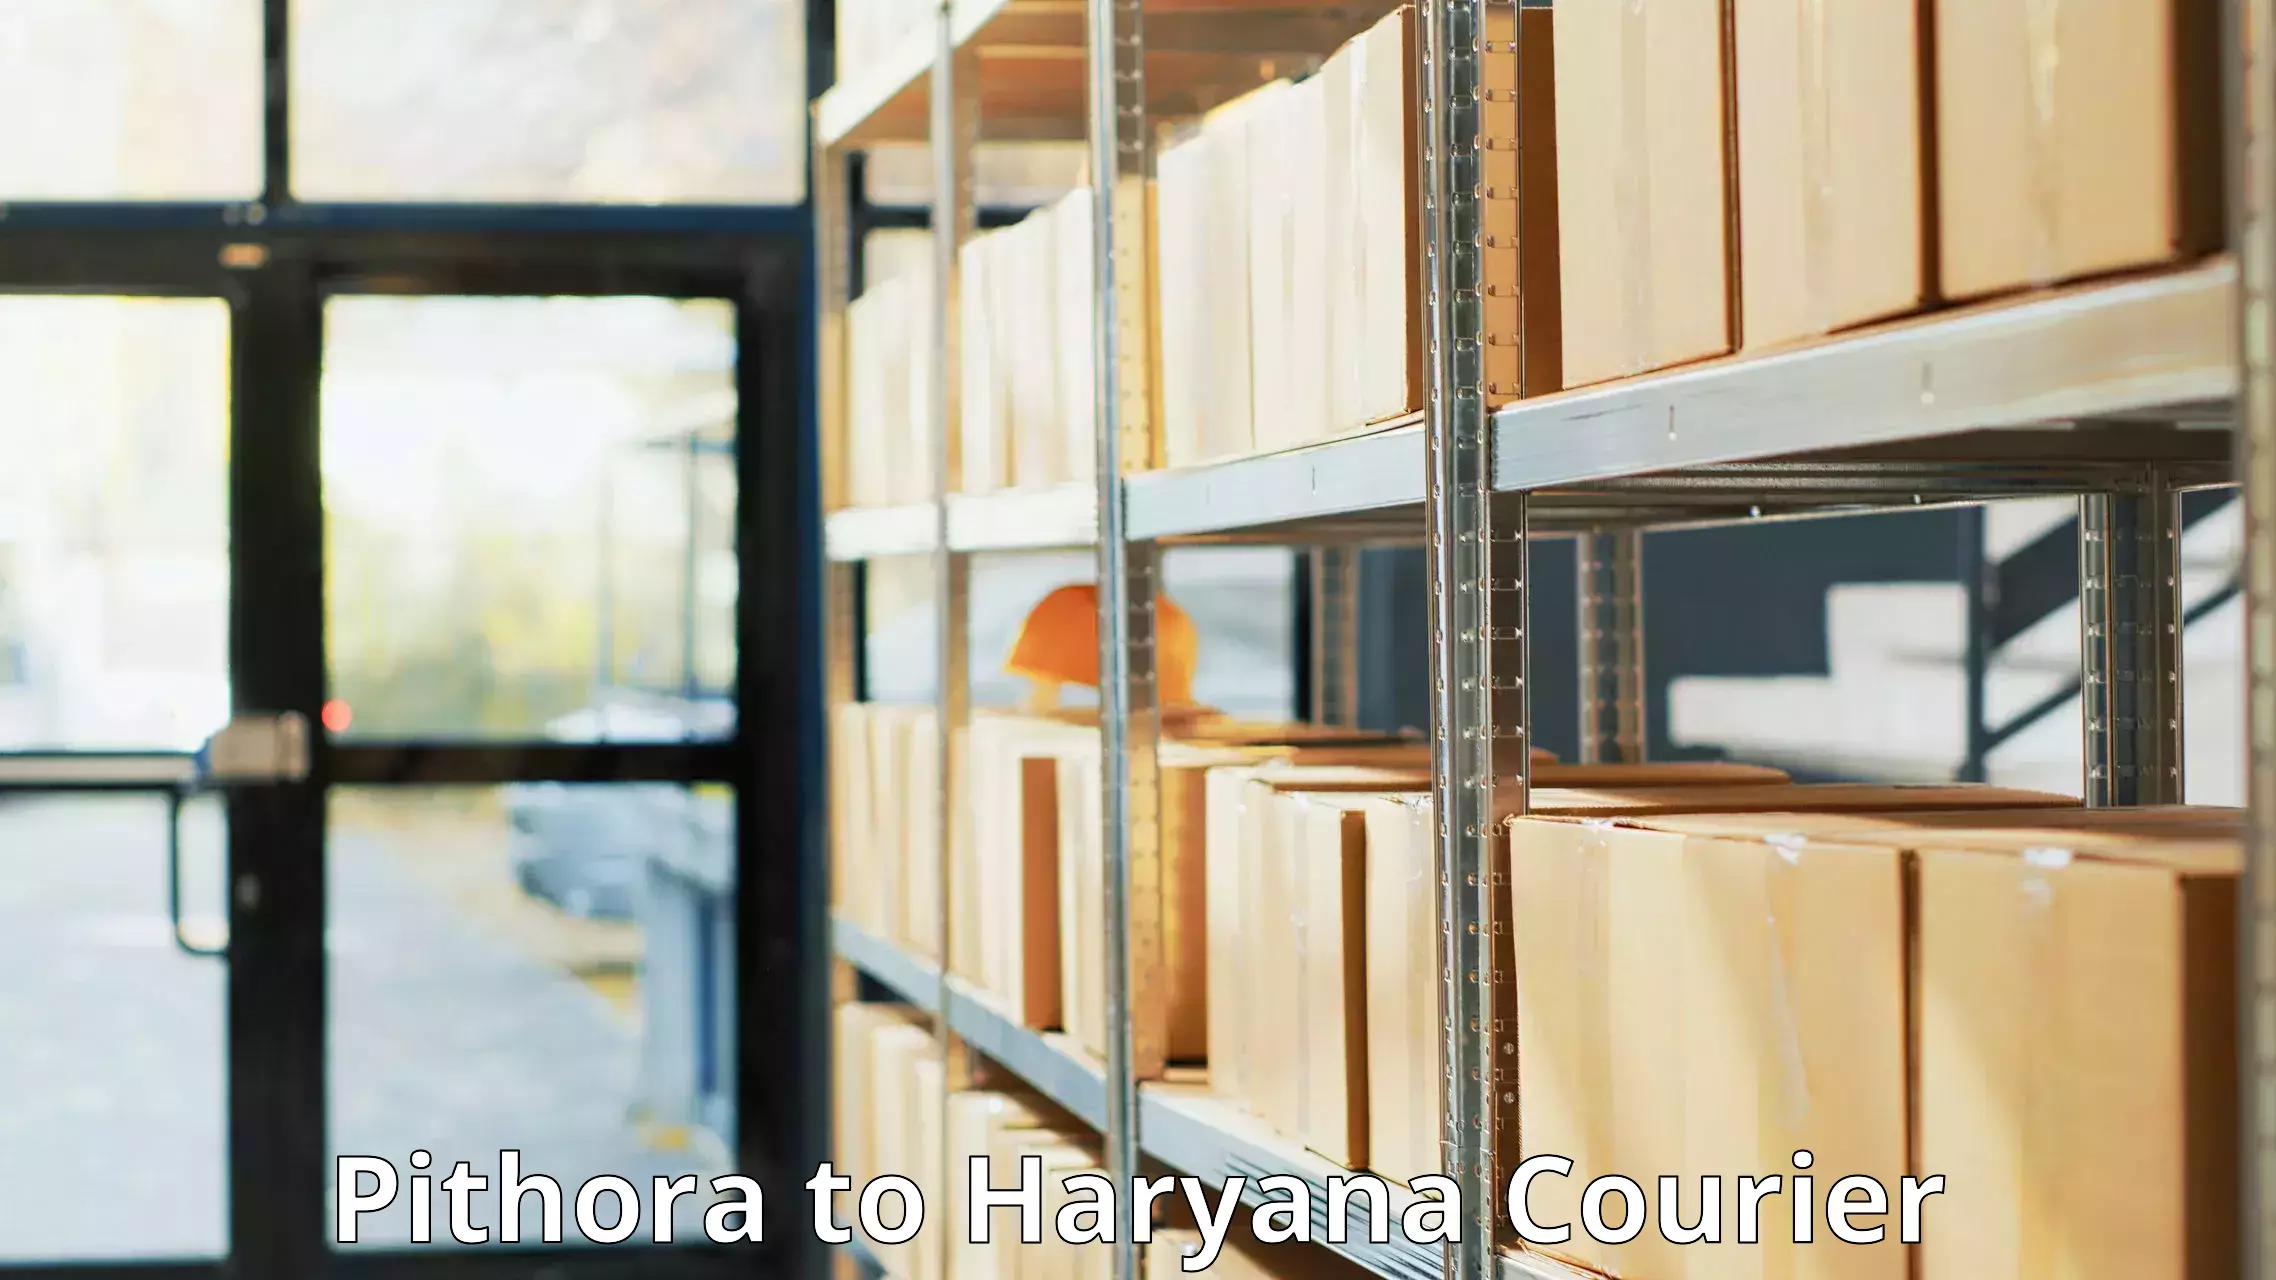 Cash on delivery service Pithora to Haryana